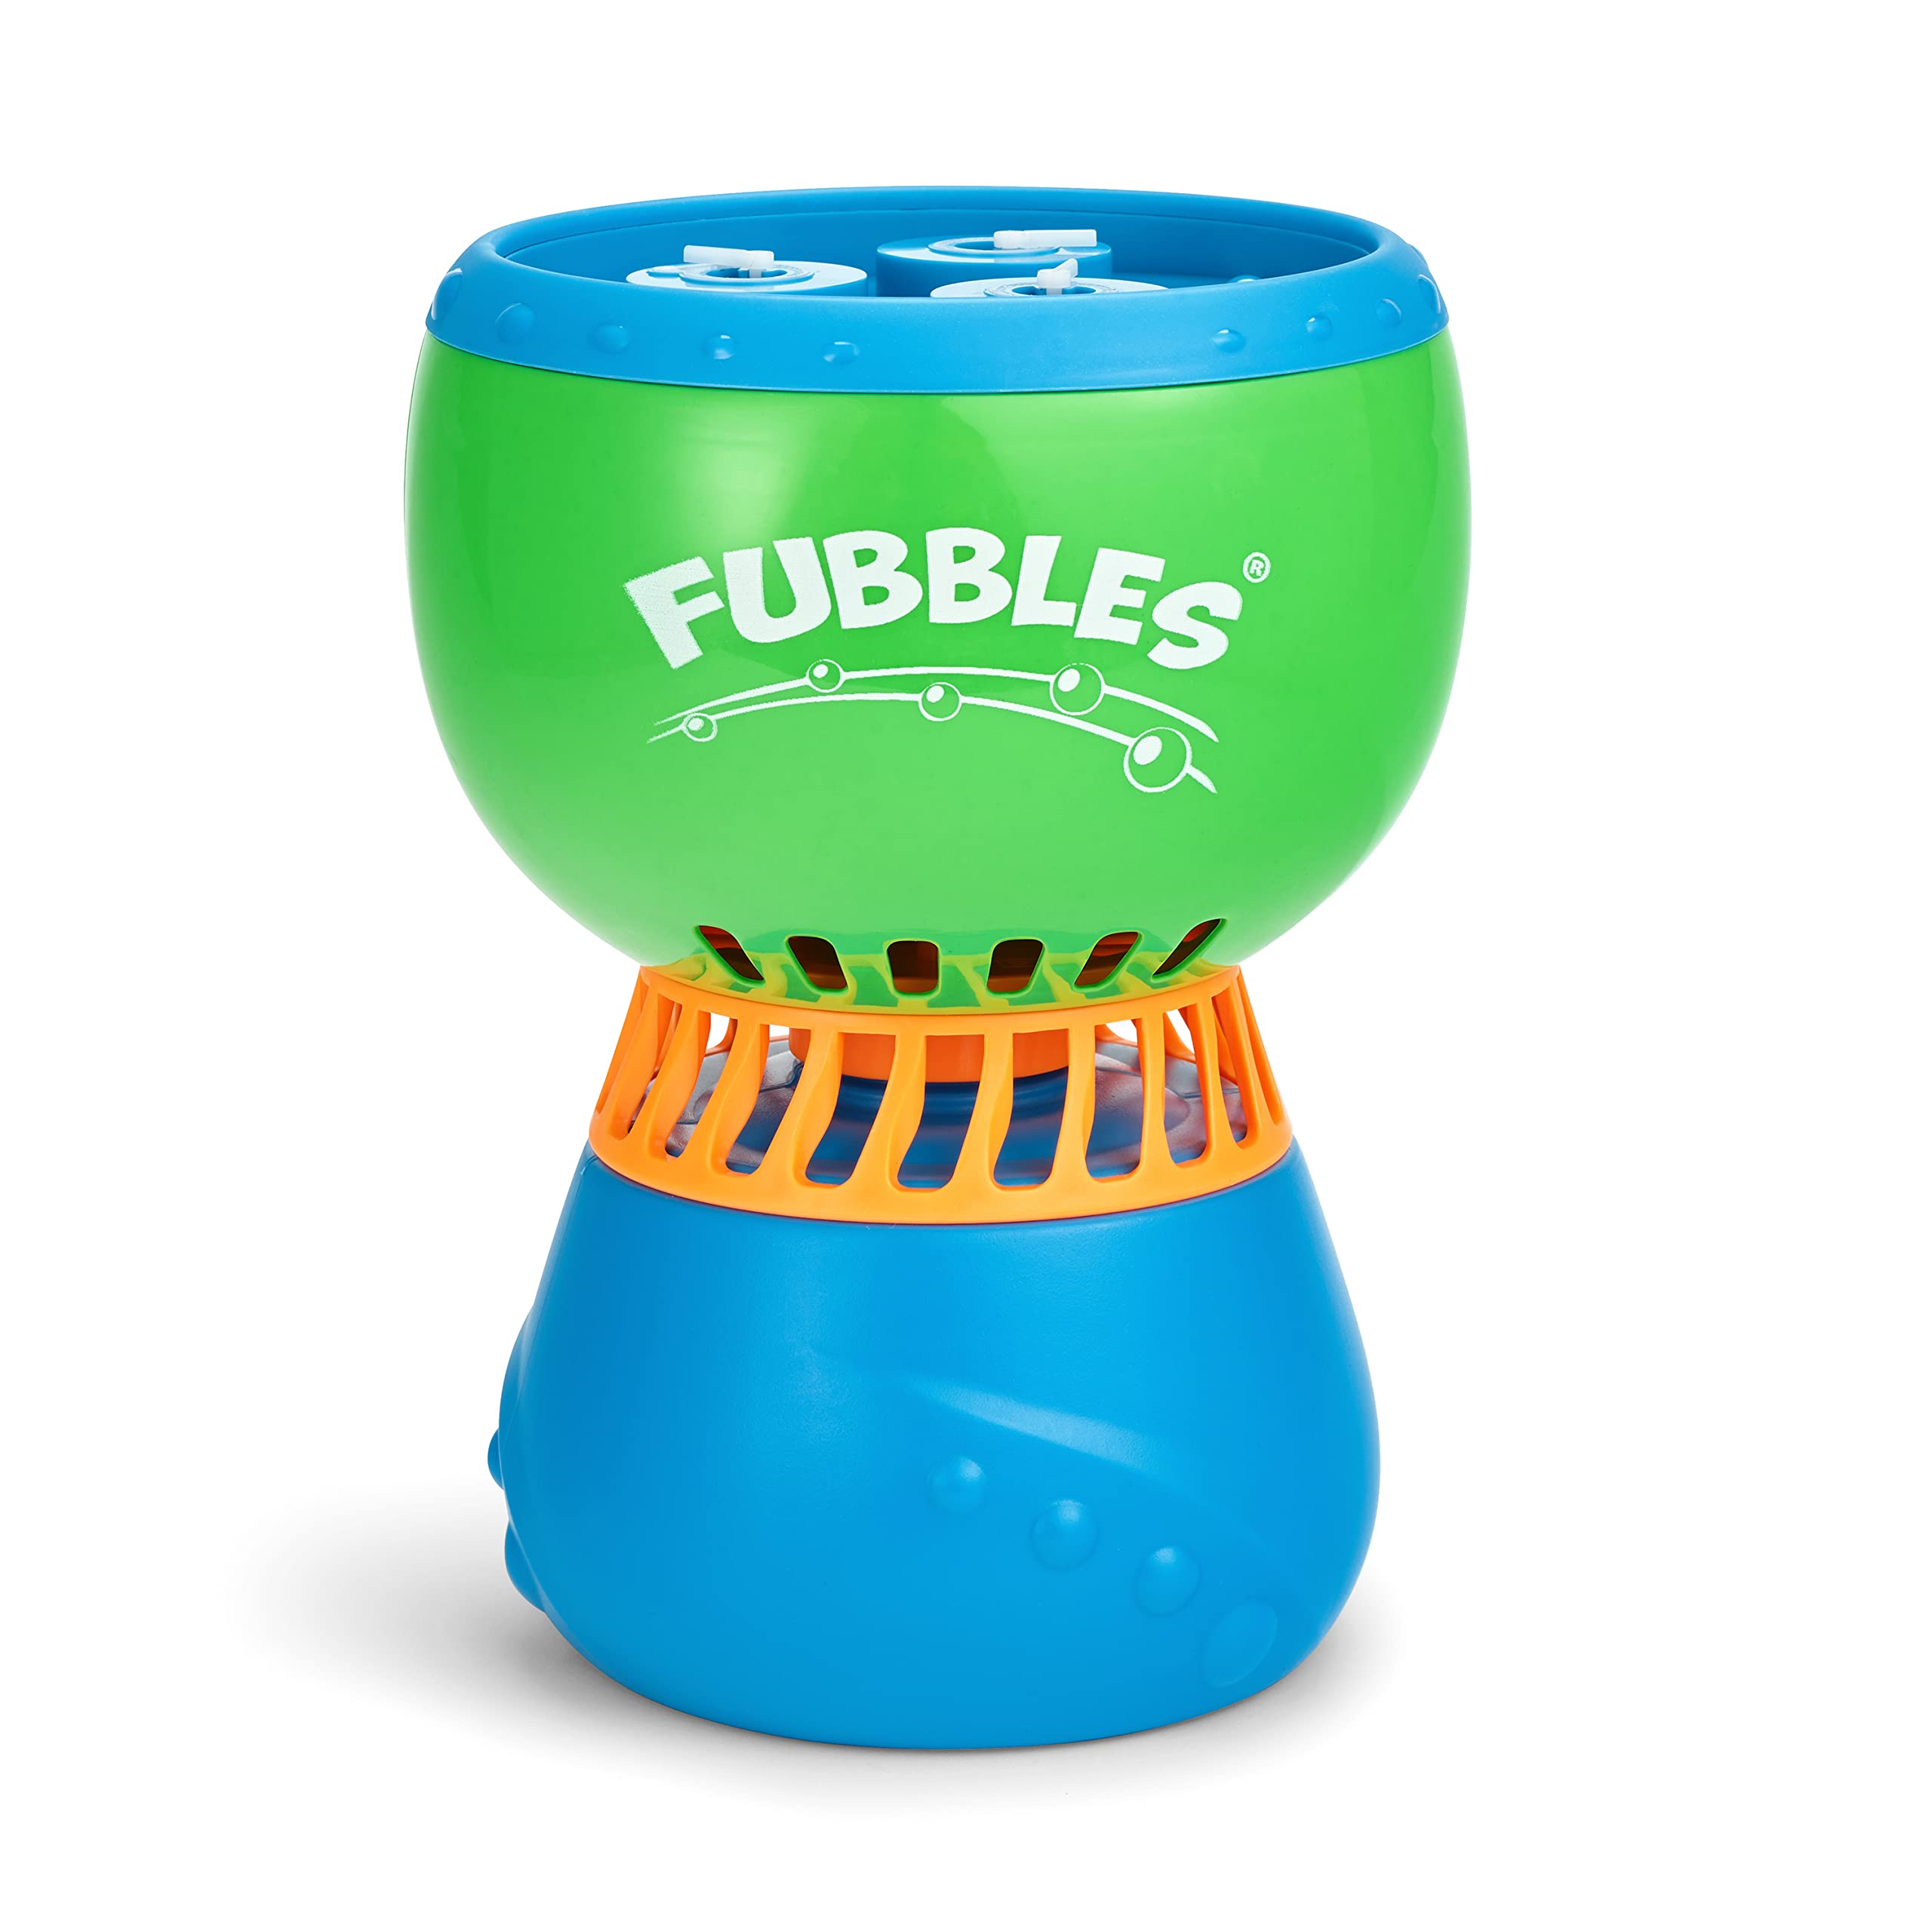 FUBBLES NO Spill Funfiniti Bubble Machine | Blows One Hour of Non Stop Bubbles |Amazon Exclusive Toy Set Includes 36oz of Non Toxic Refill Solution (Bubble Solution Bottle Colors Will Vary) Pack of 1